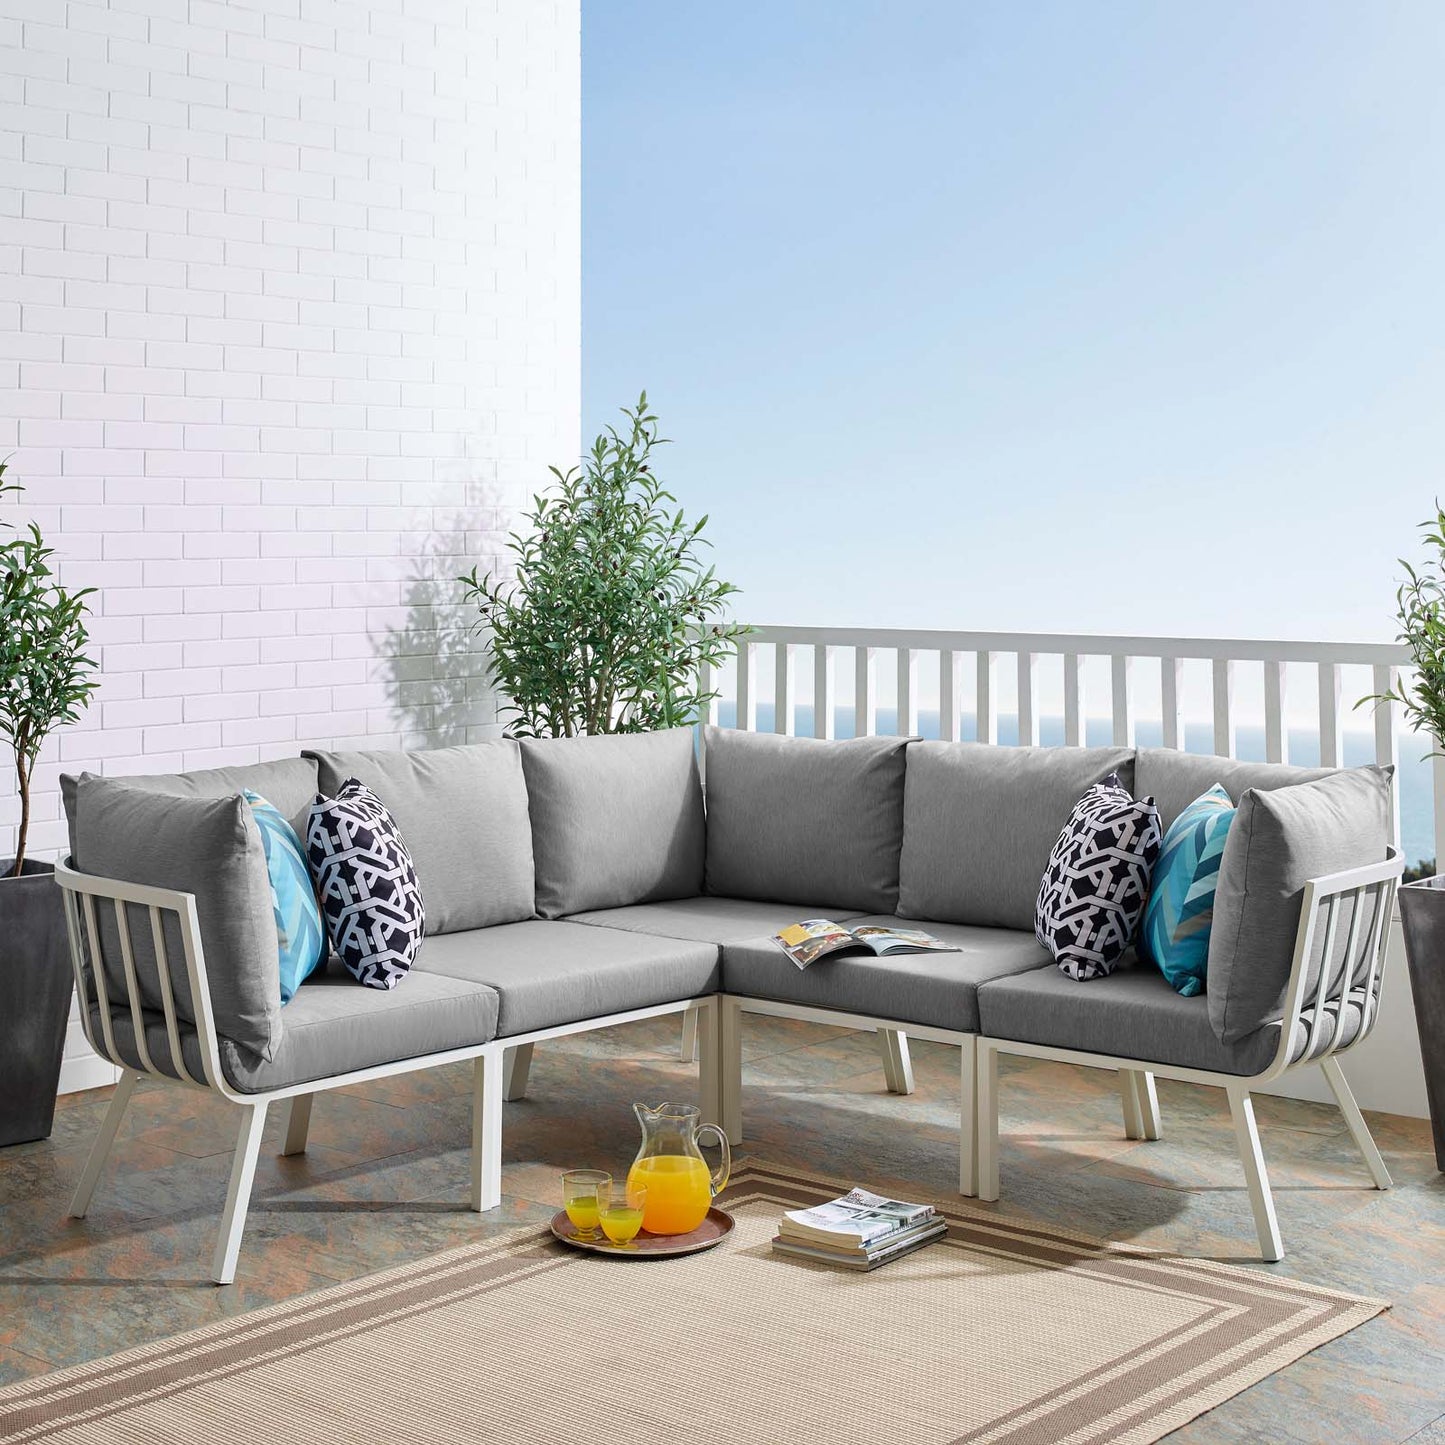 Riverside 5 Piece Outdoor Patio Aluminum Sectional White Gray EEI-3789-WHI-GRY